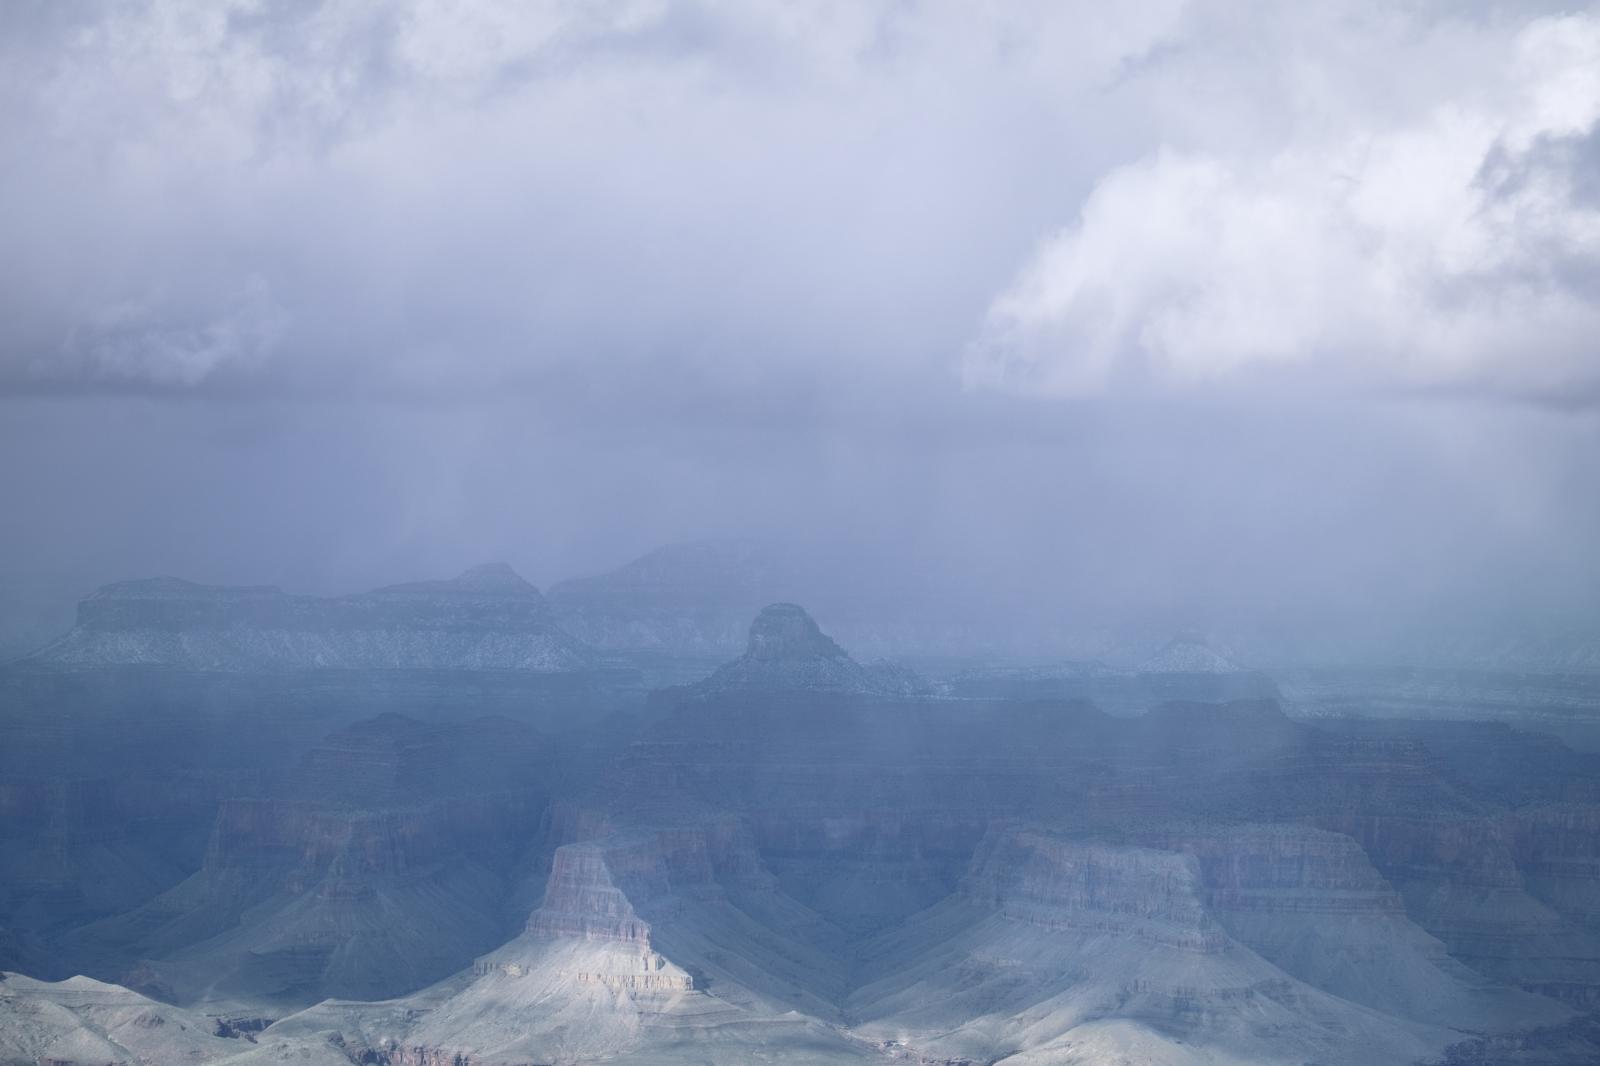 Winter Snowstorm, Grand Canyon | Buy this image